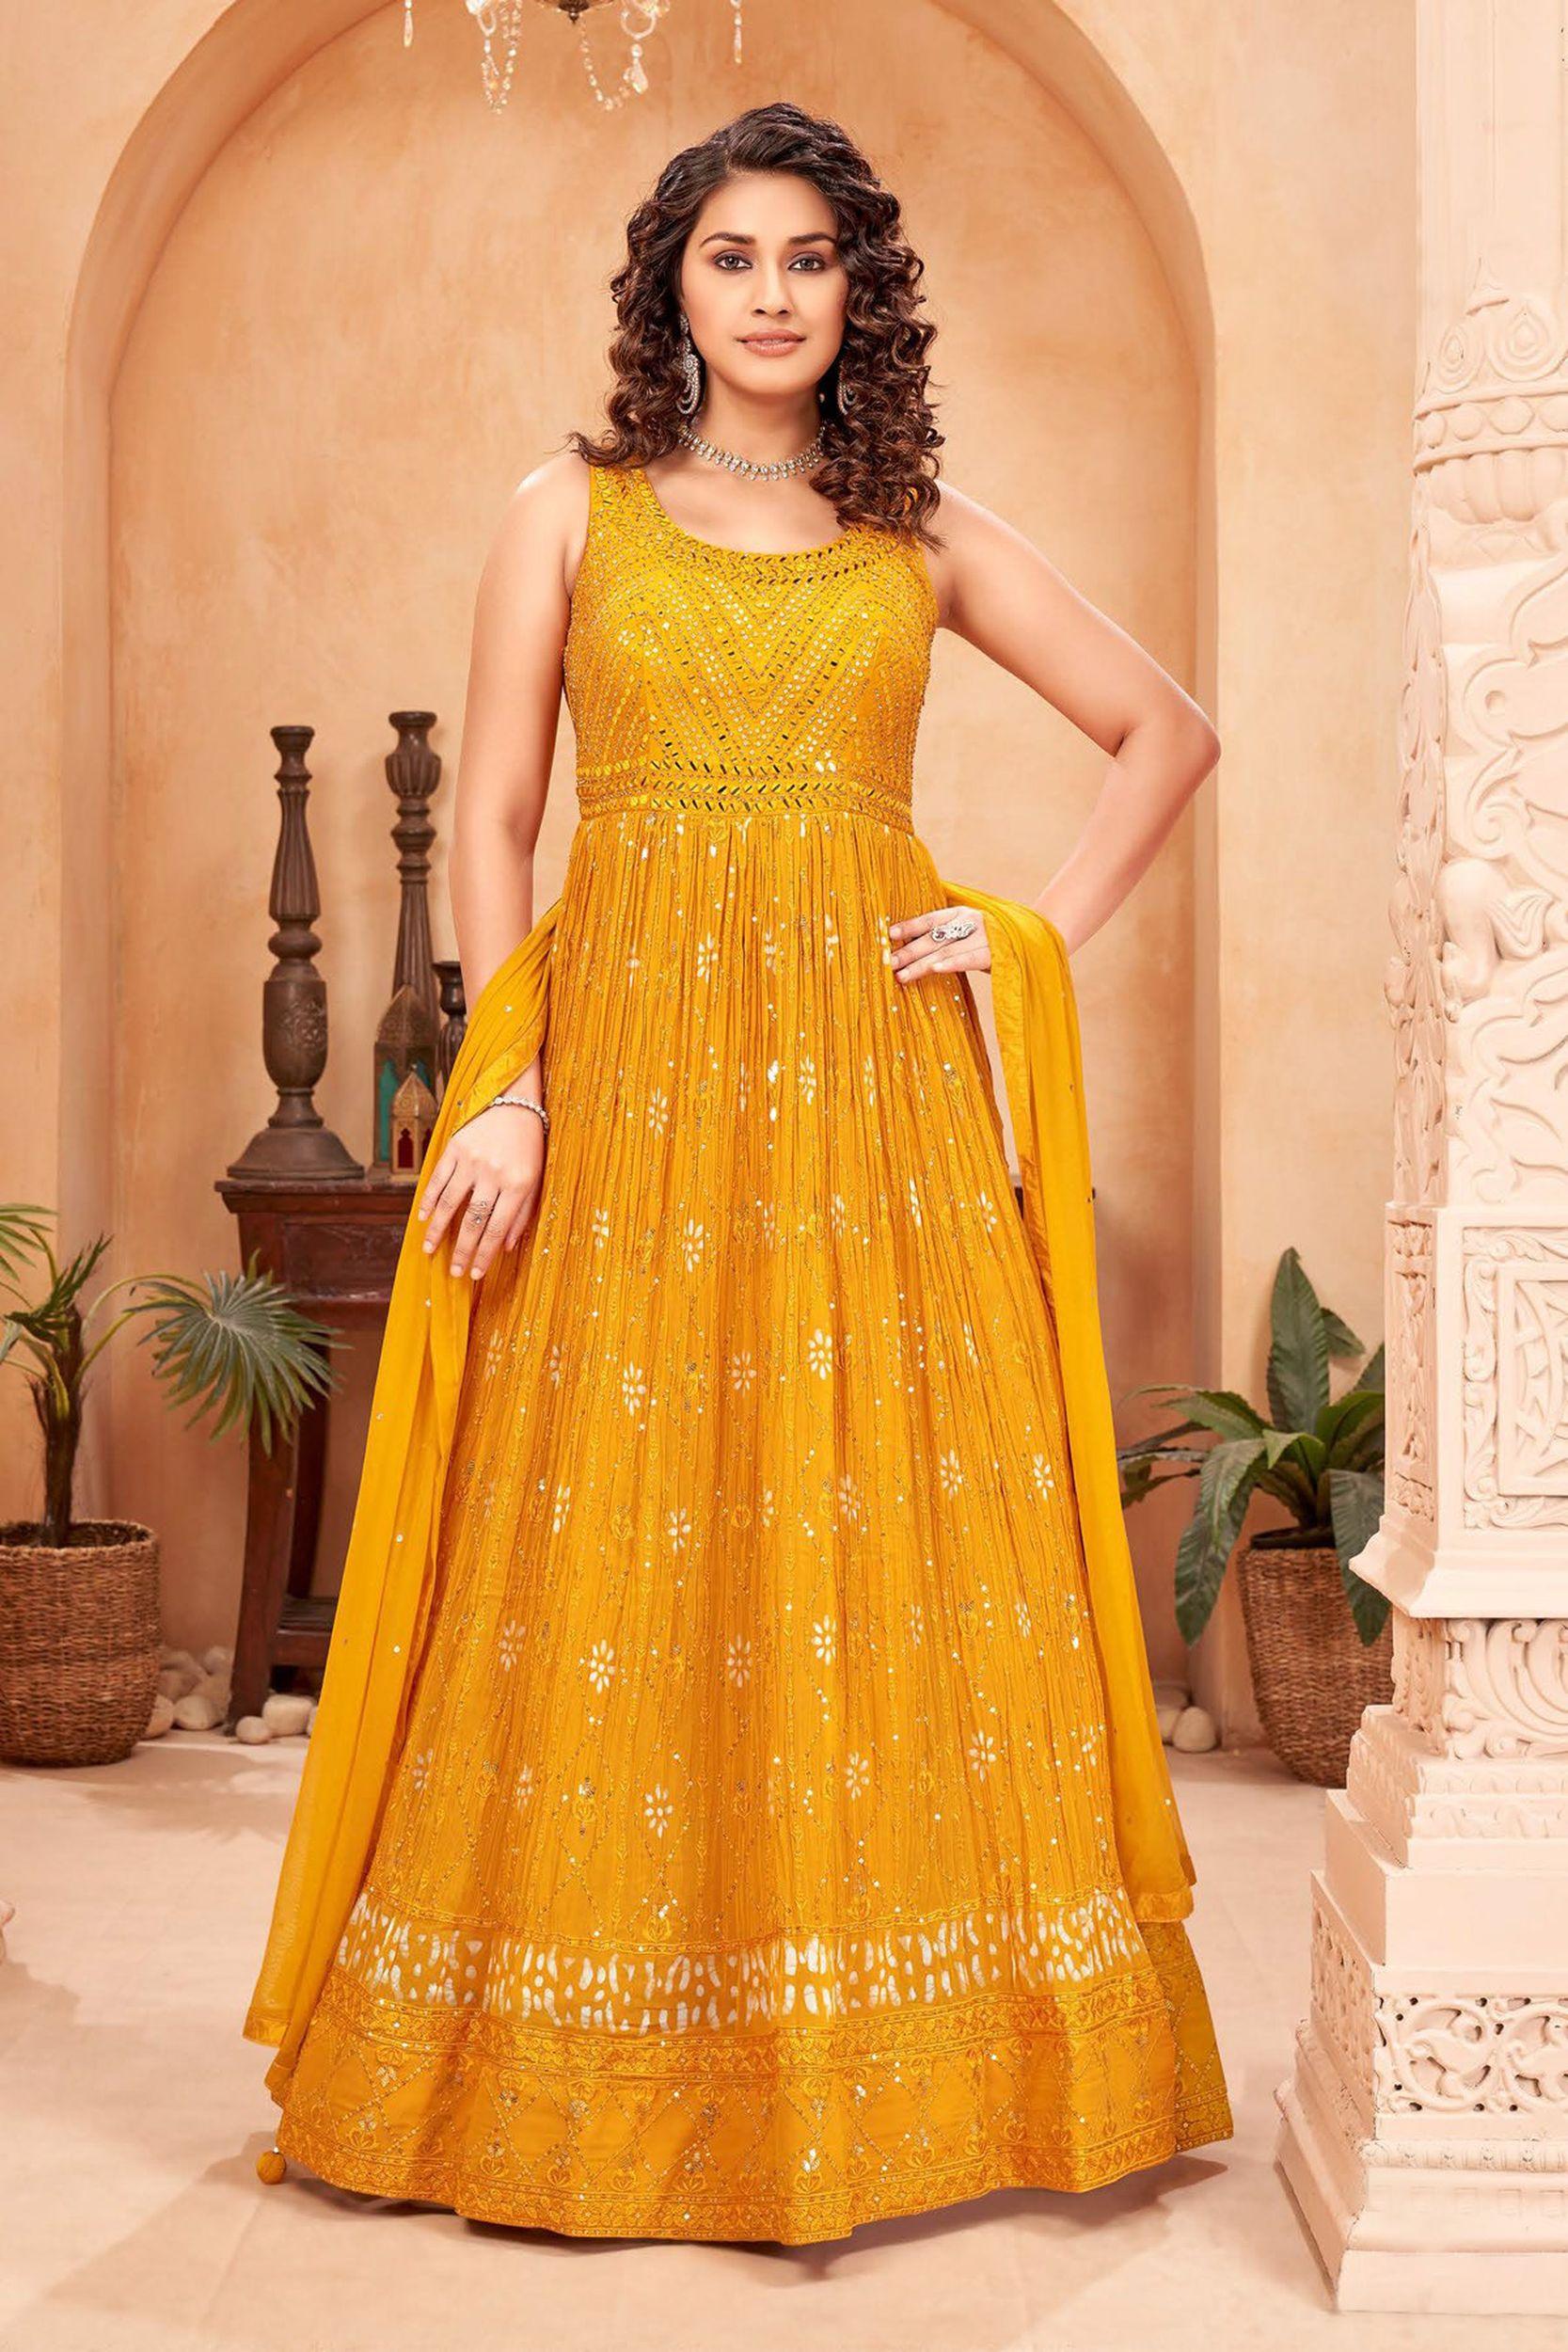 Gorgeous mustard yellow silk gown | Fashion dresses, Evening dresses,  Beautiful gowns